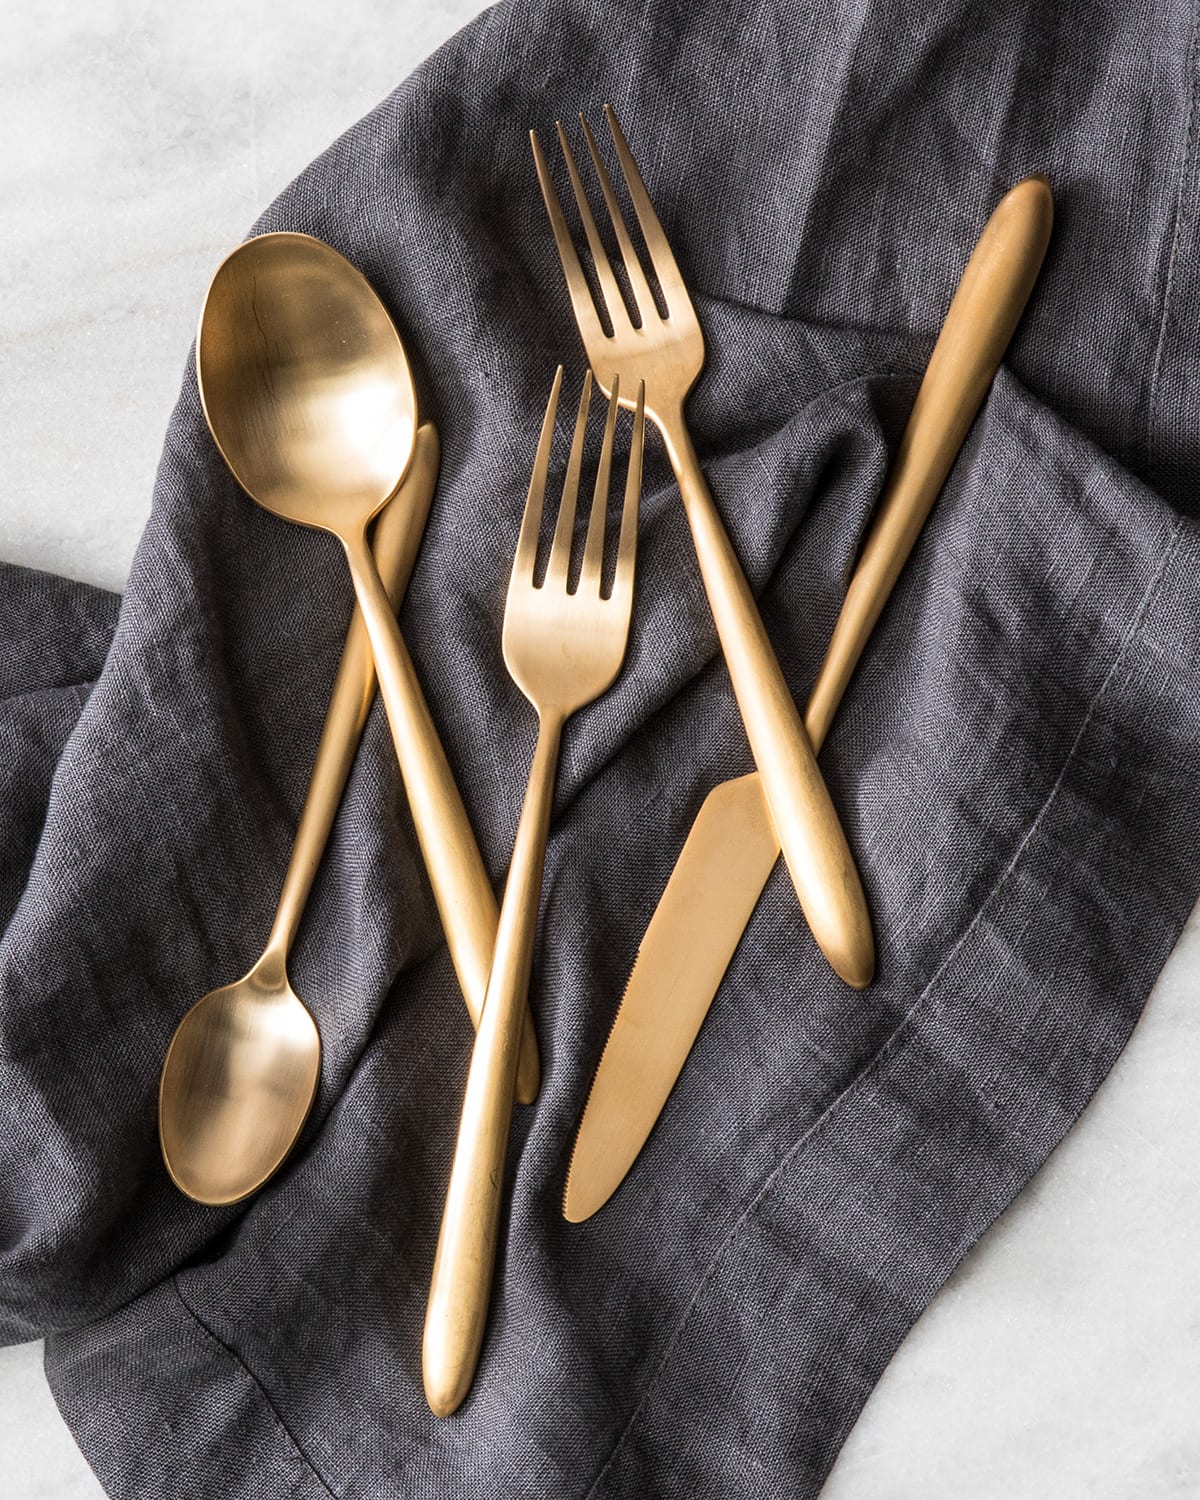 Shop Fortessa Velo Brushed Gold Plated Stainless Steel 20-piece Flatware